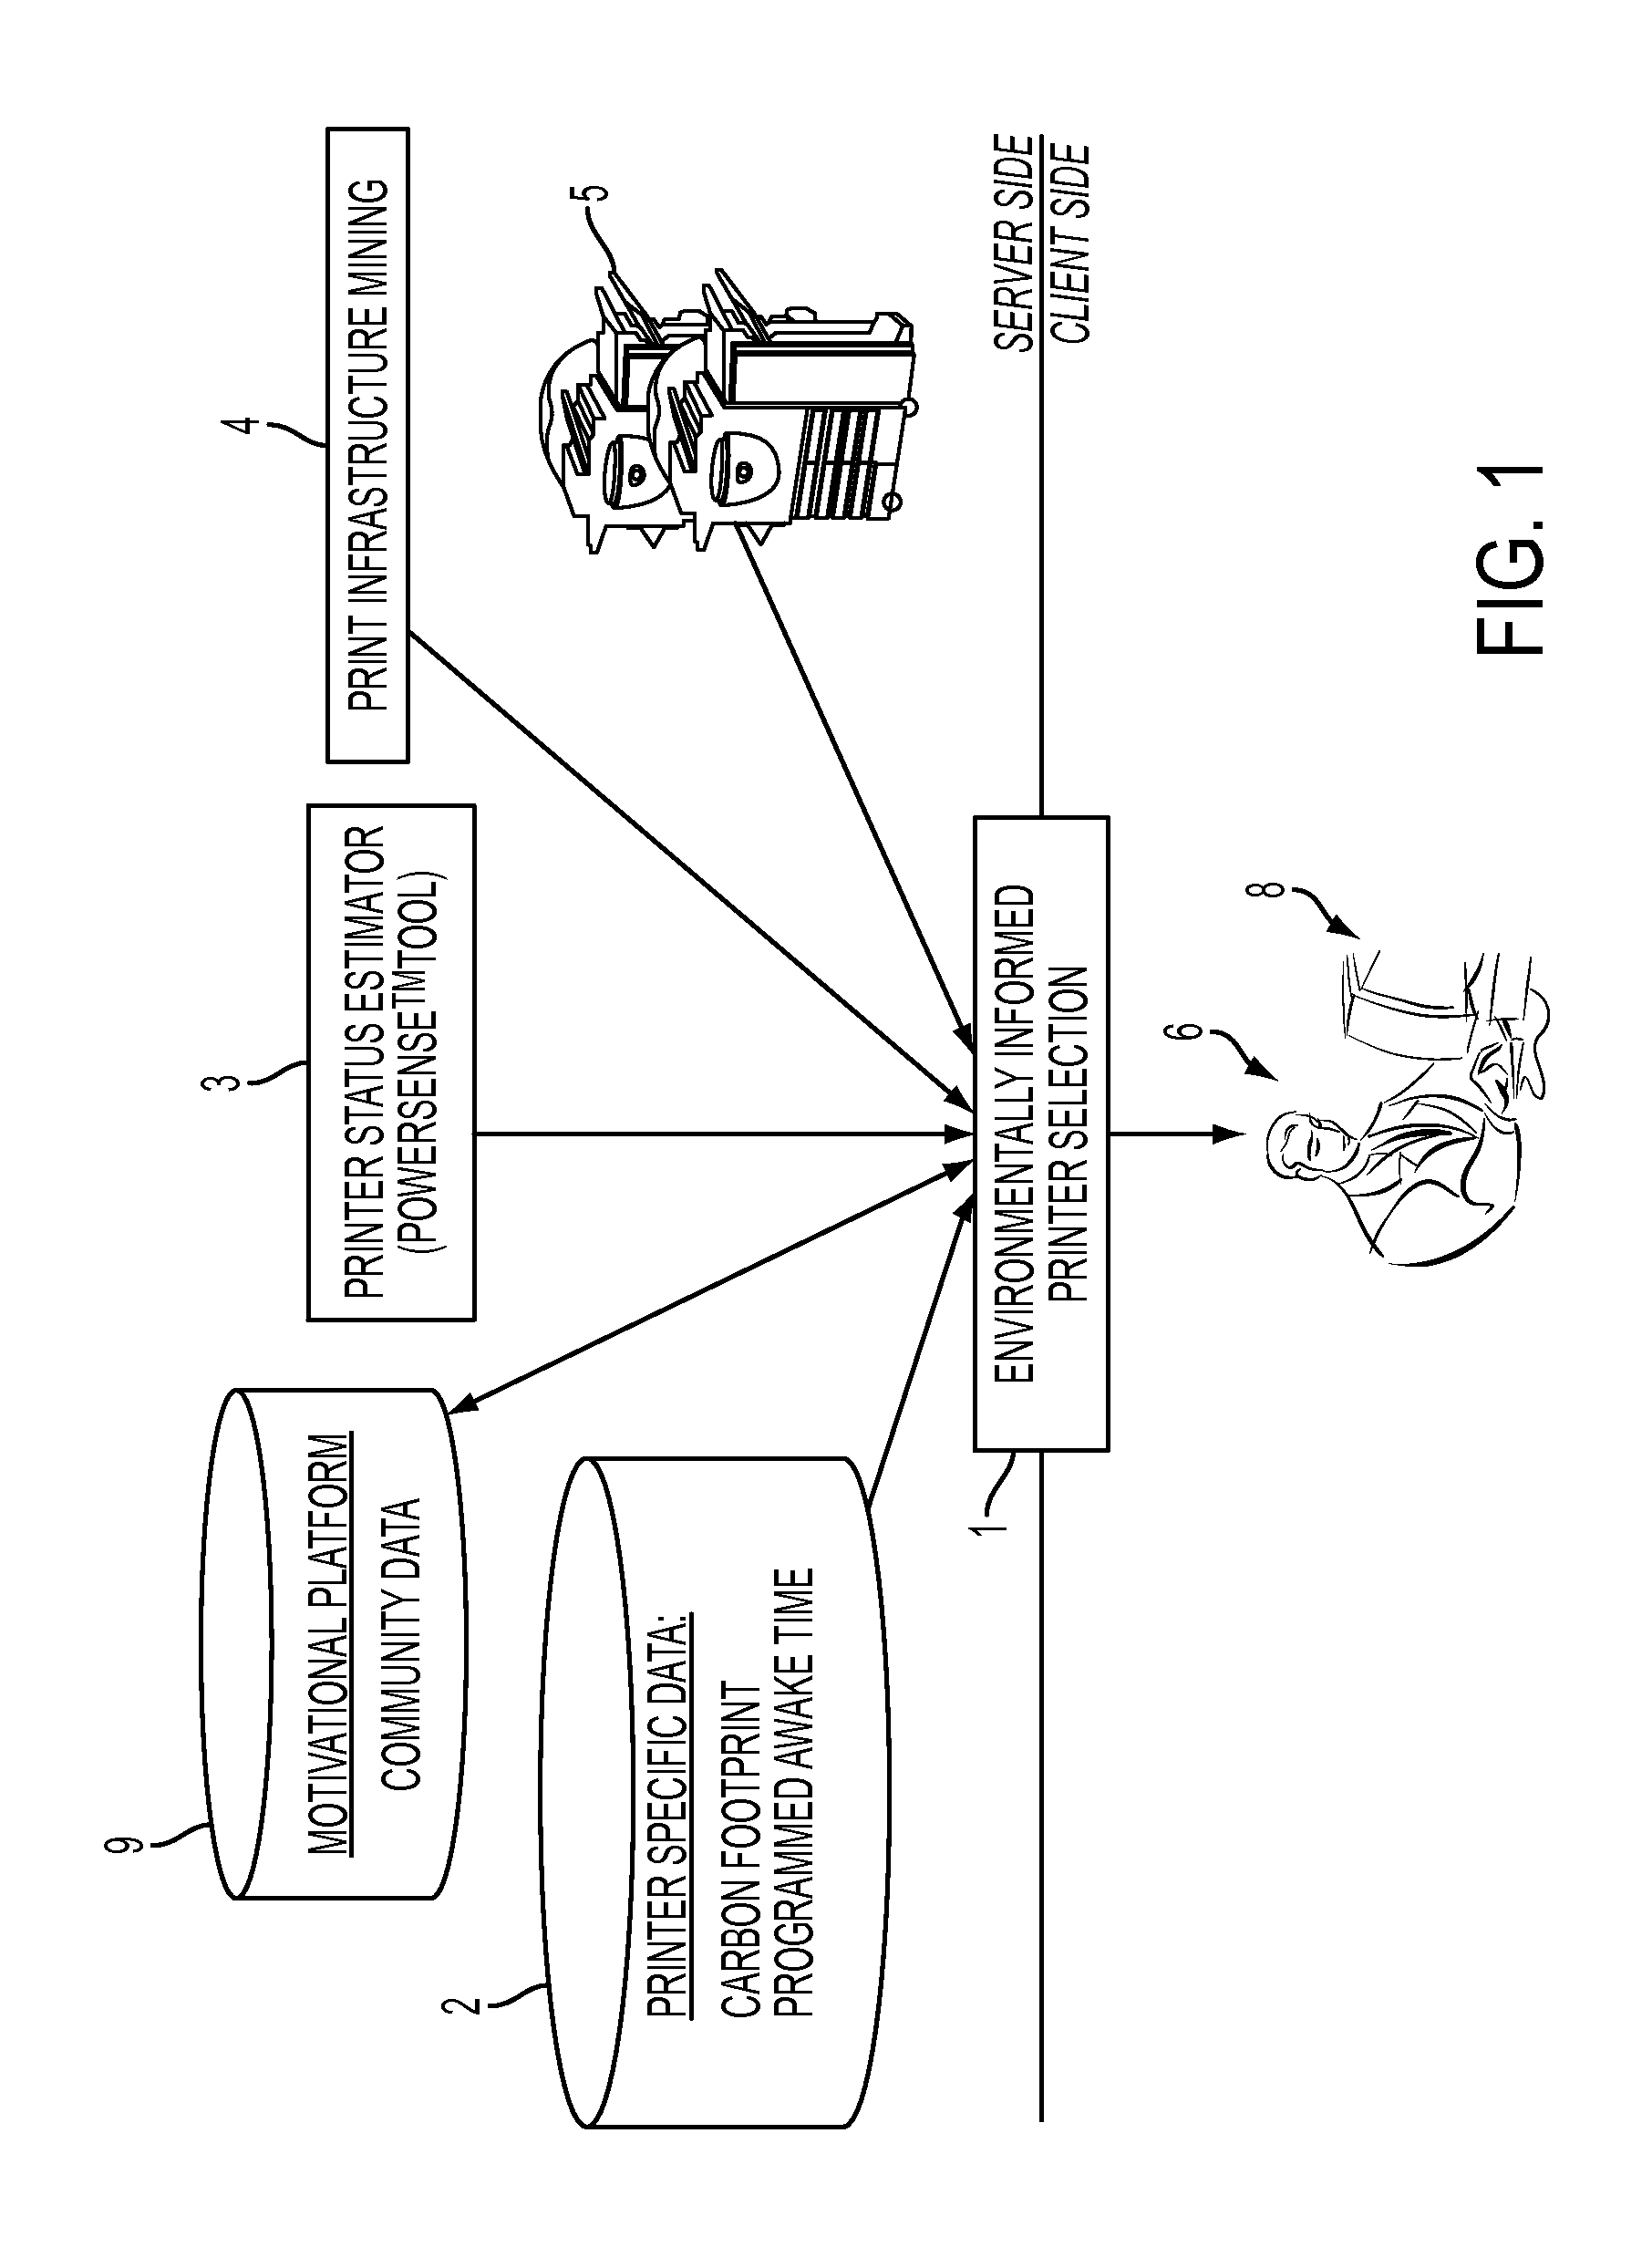 Method and system for mutual augmentation of a motivational printing awareness platform and recommendation-enabled printing drivers